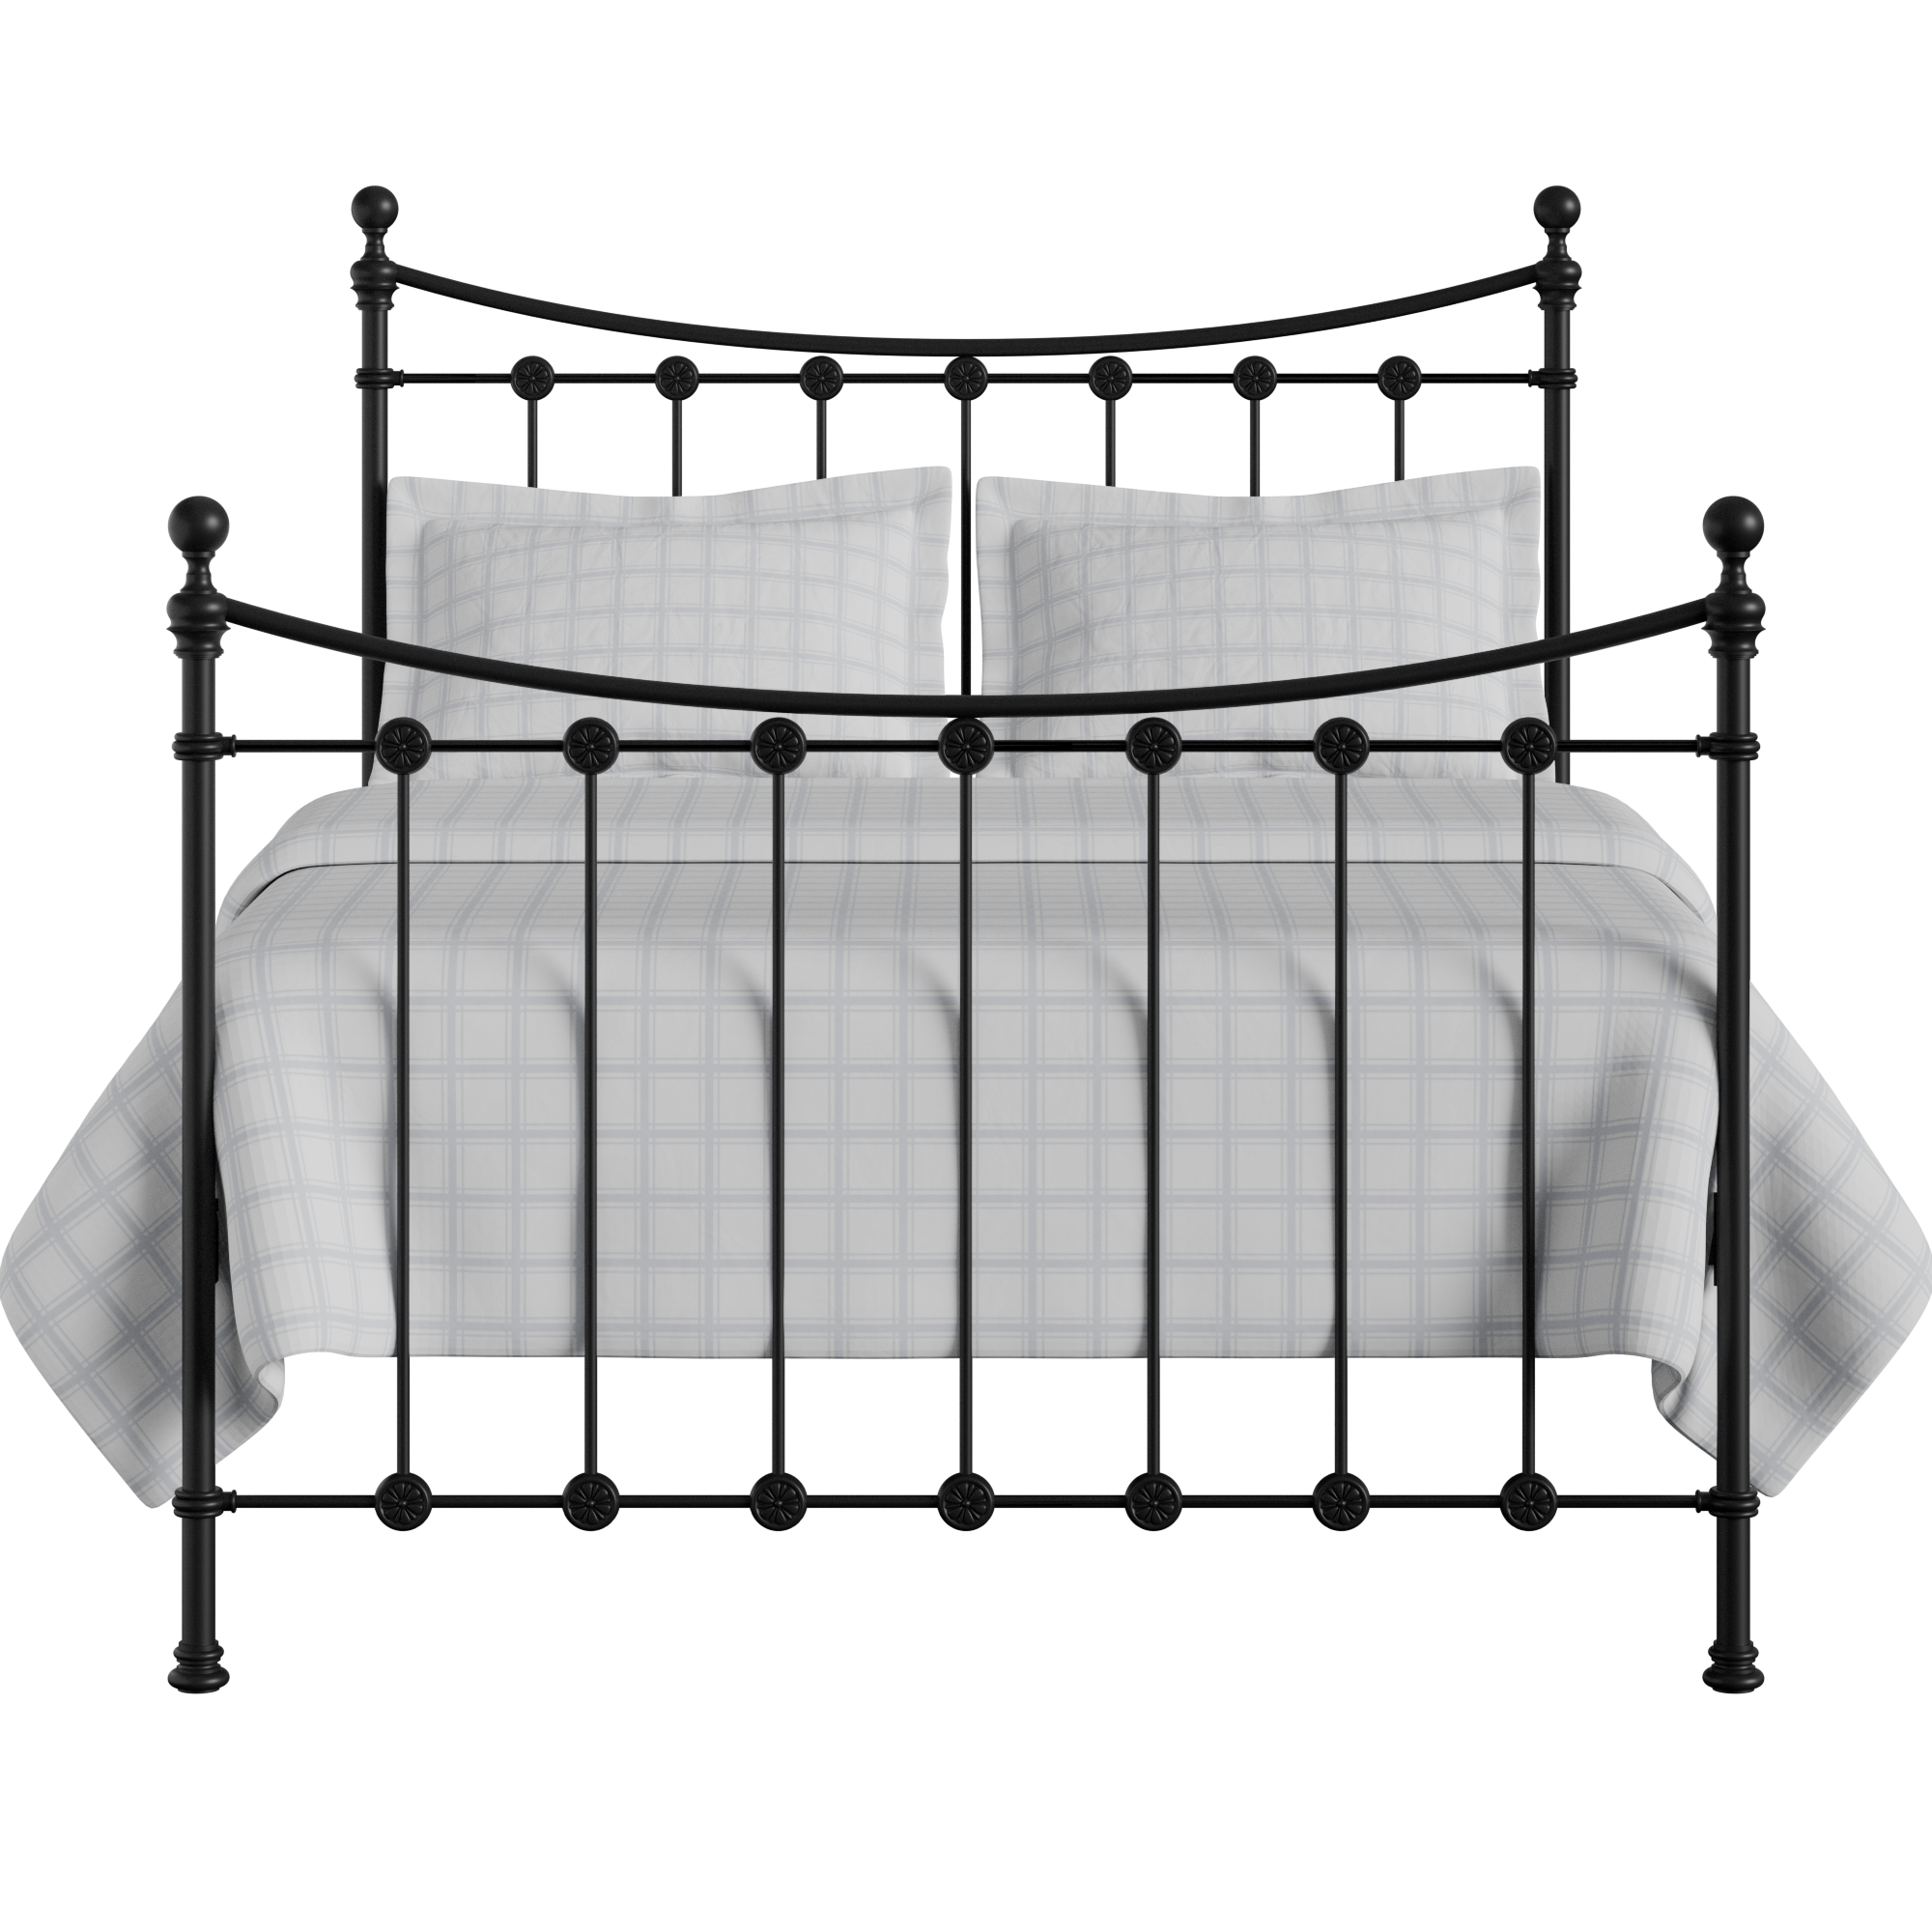 Carrick Solo iron/metal bed in black